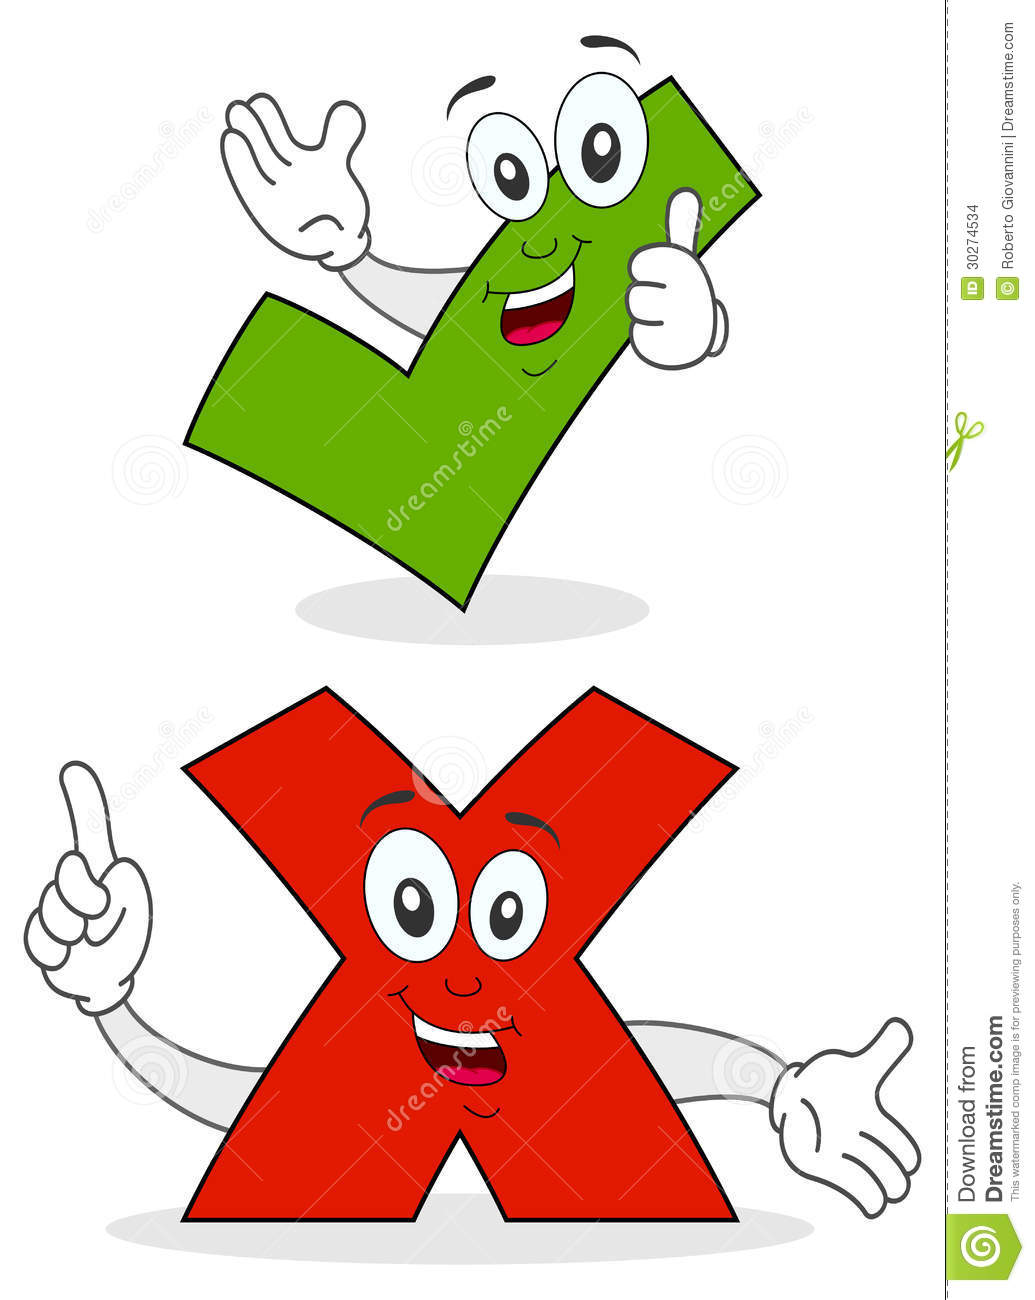 Two Cartoon Character Smiling  A Green Yes Check Mark And A Red No    